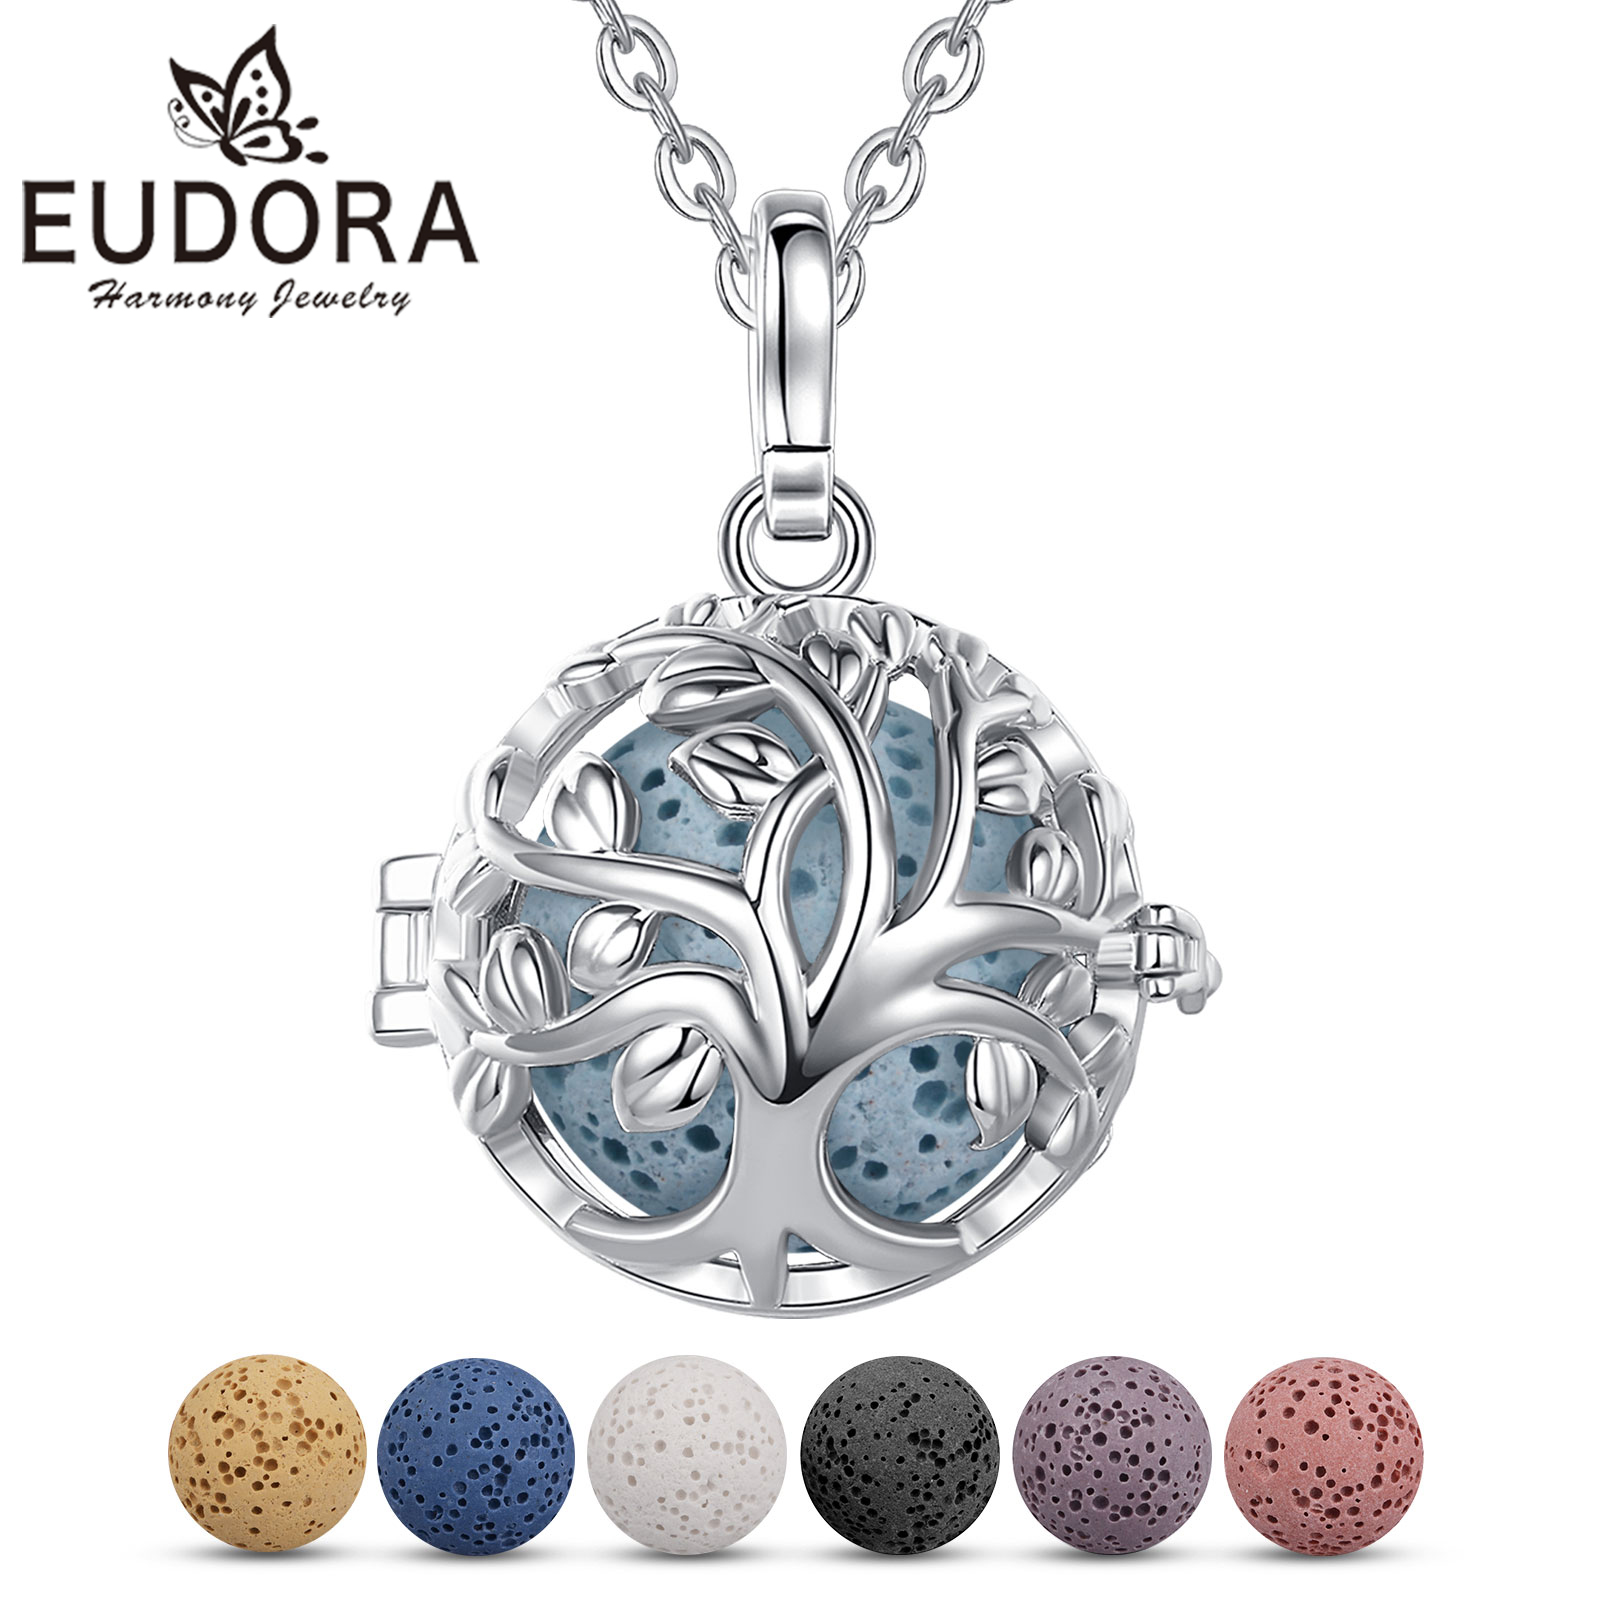 EUDORA 18mm Tree of Life Cage Lave Pendant Aromatherapy Locket Diffuser Necklace Fit Volcanic Lava Stone Ball Fine Women Jewelry 1